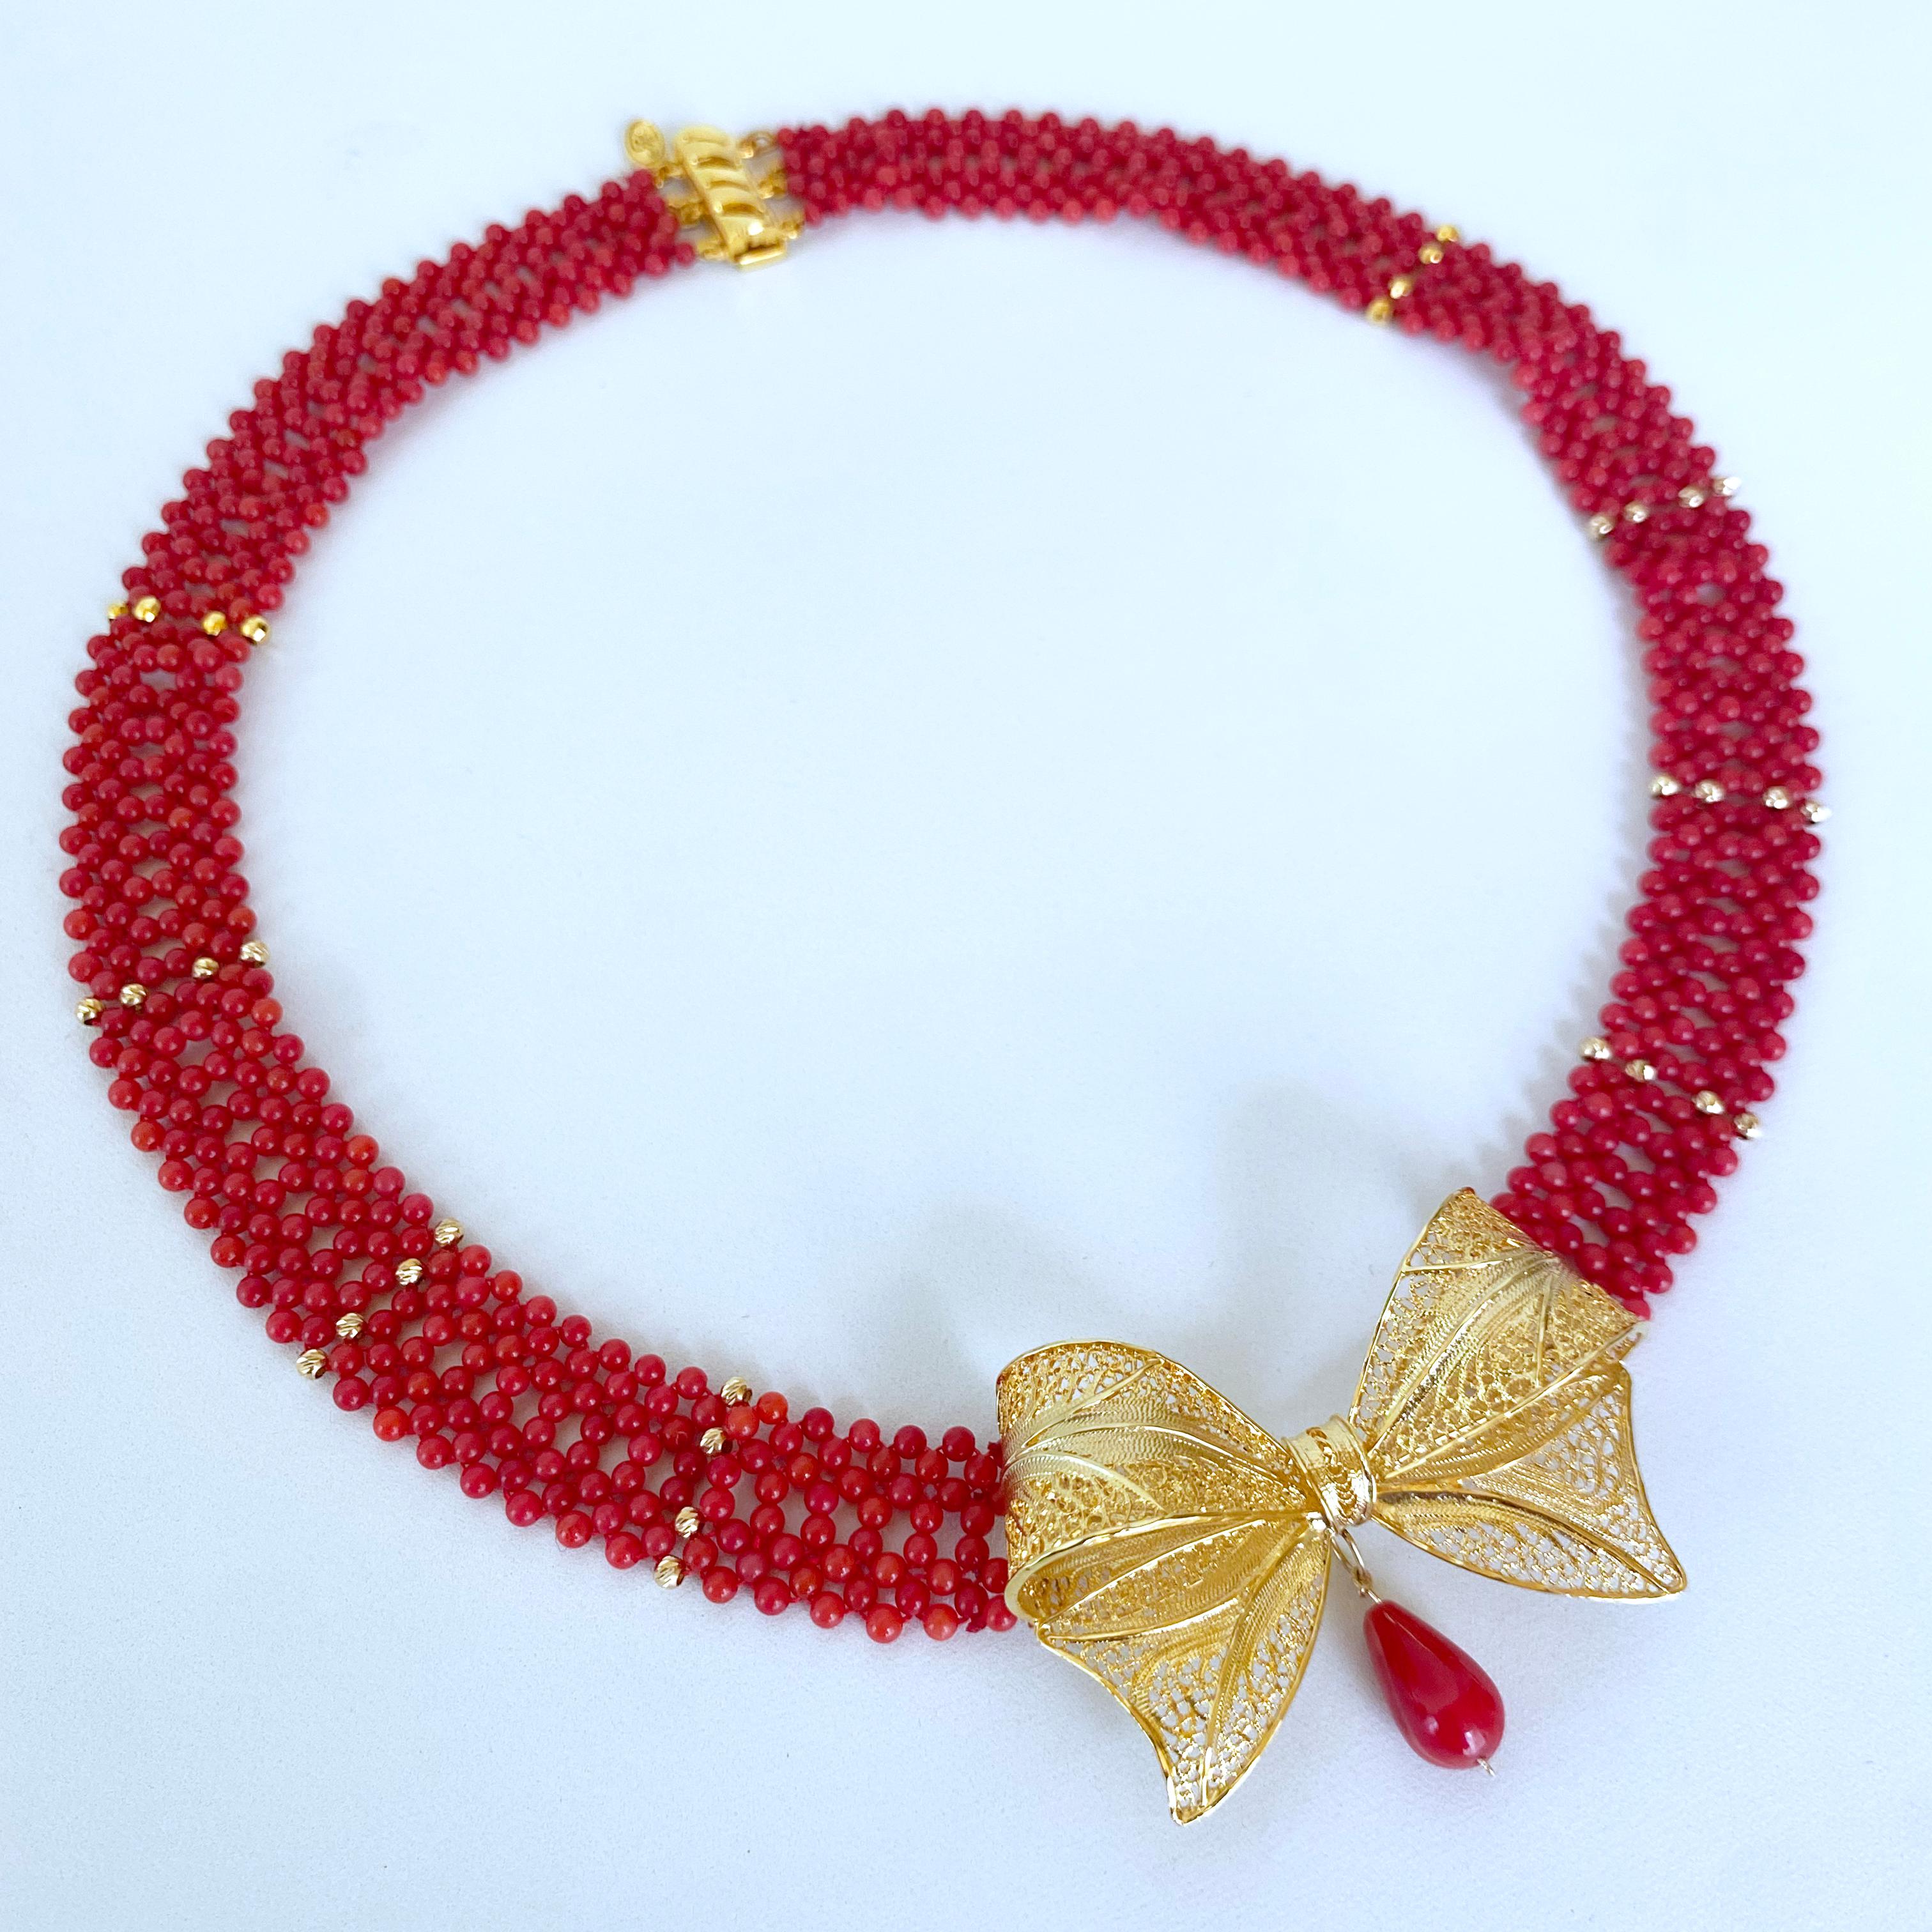 Marina J Coral Woven Necklace with 18k Plated Bowtie Centerpiece & Detailings For Sale 5